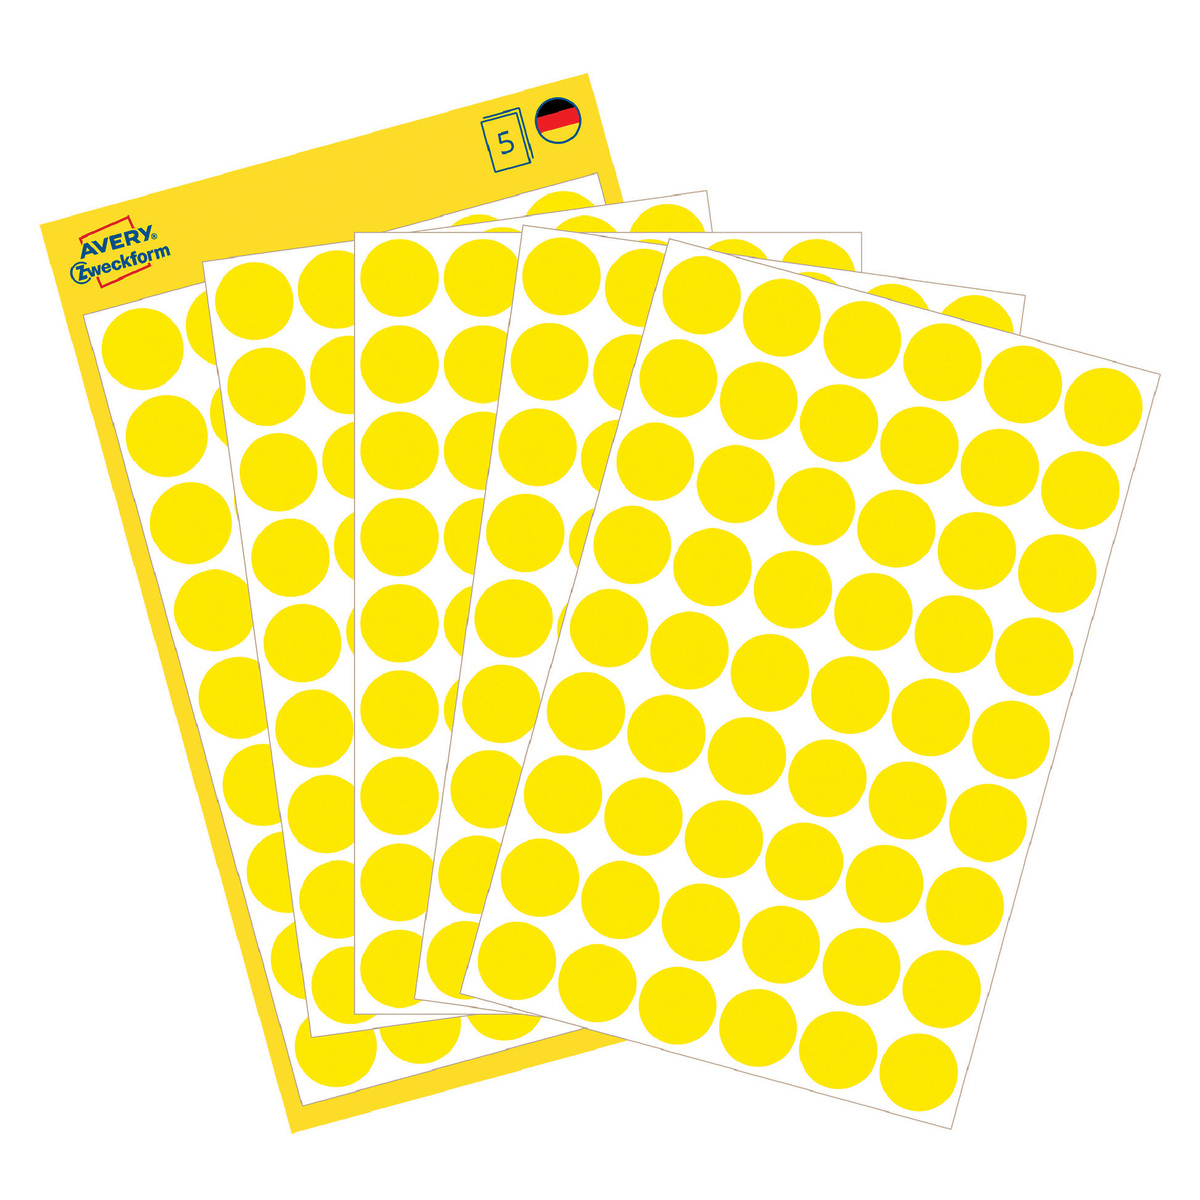 Avery 12 mm Permanent Dot Stickers, 270 Labels/5 Page, Yellow, 3144